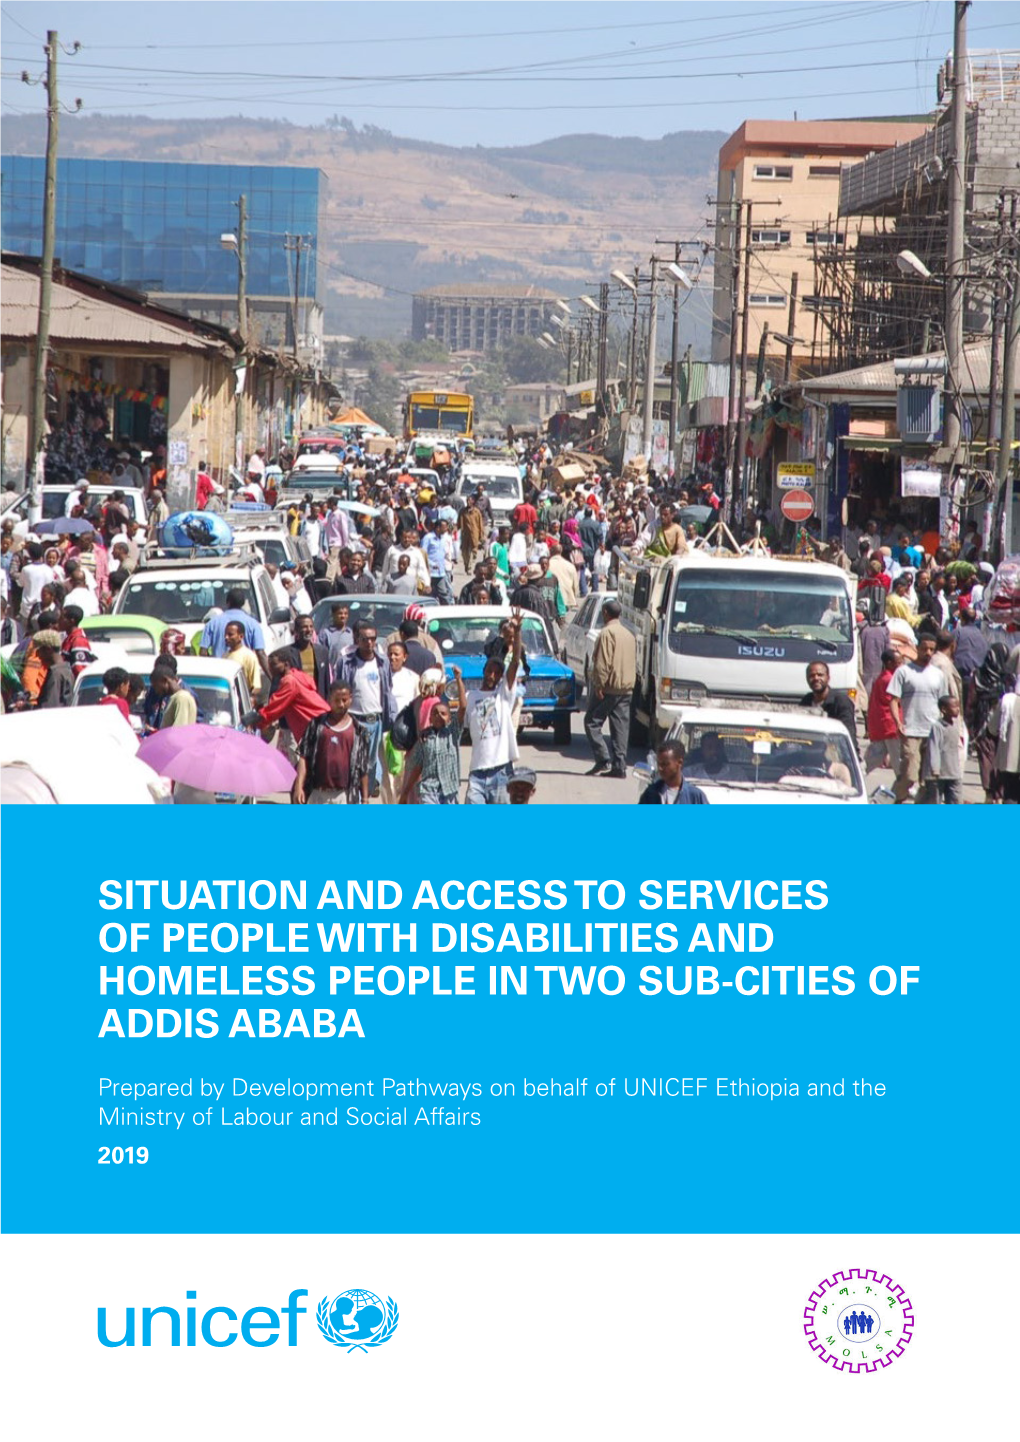 Situation and Access to Services of People with Disabilities and Homeless People in Two Sub-Cities of Addis Ababa